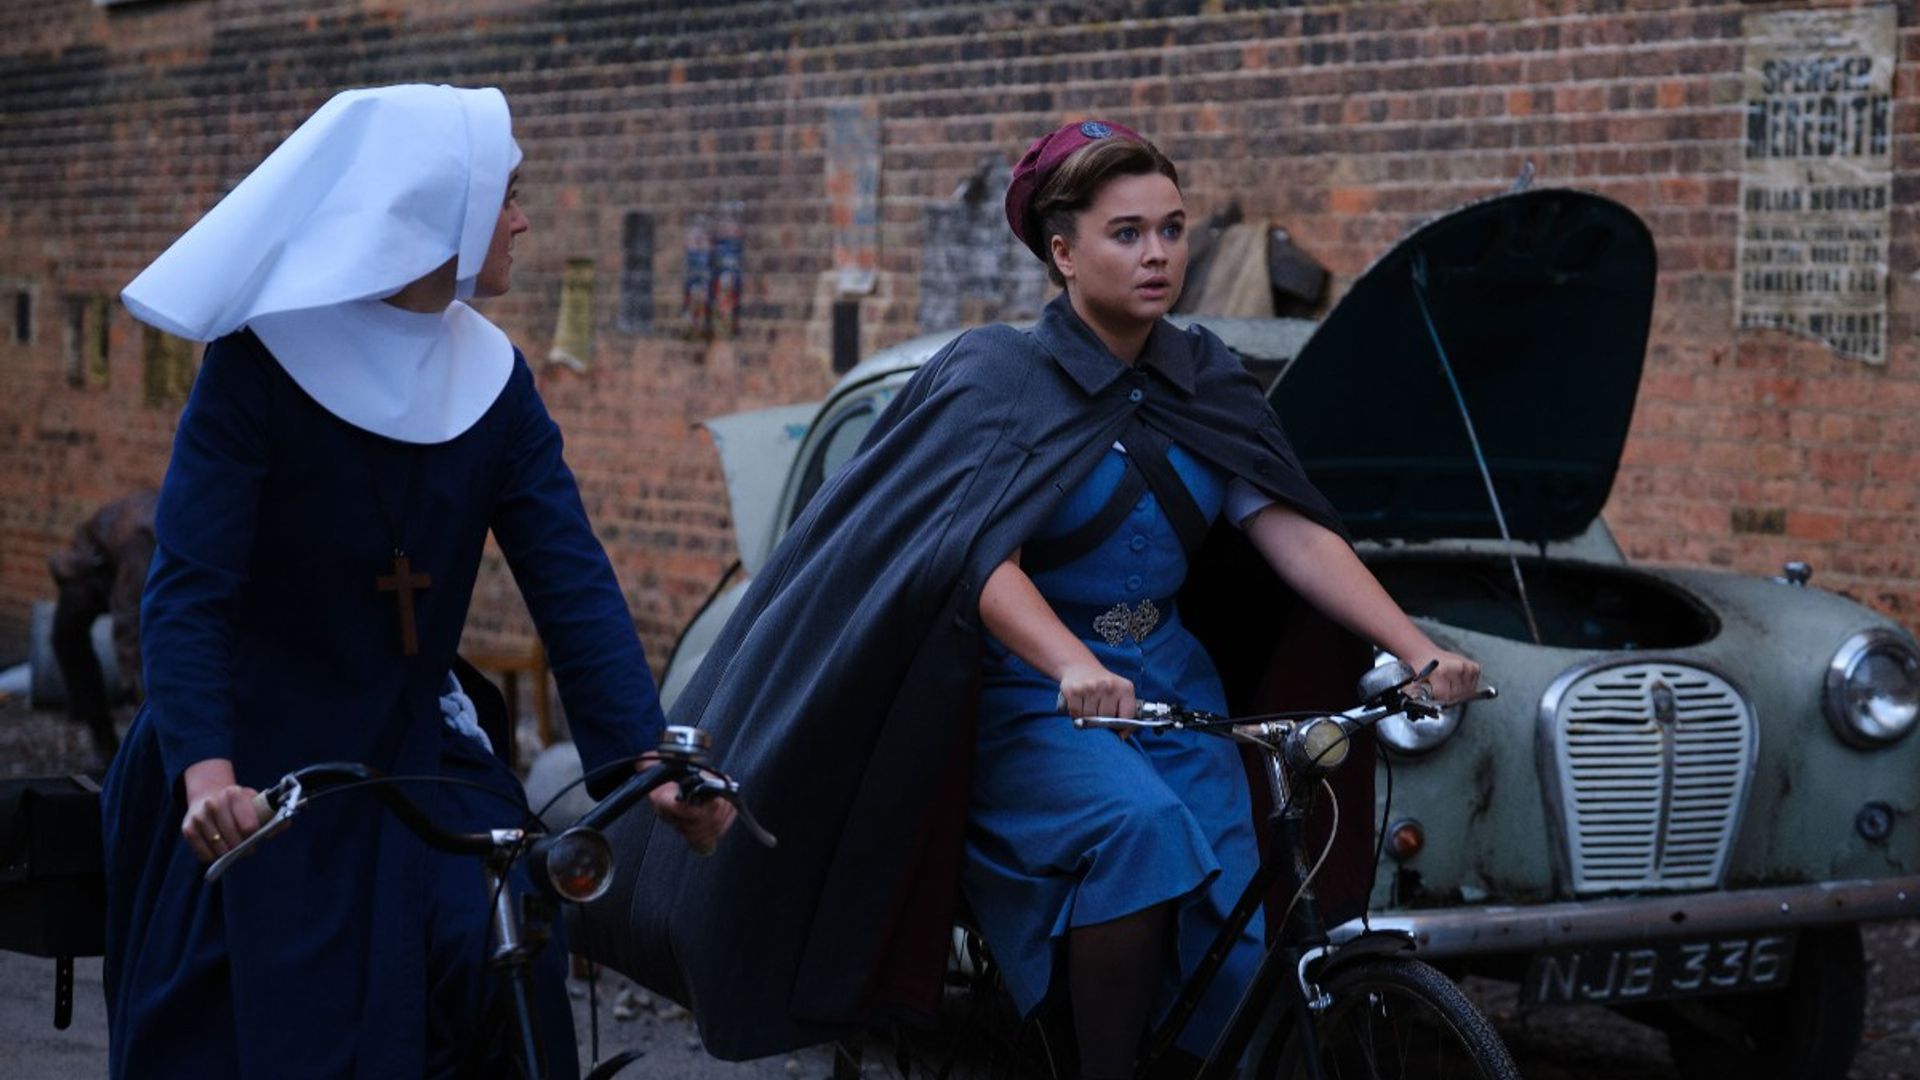 Call the Midwife viewers left 'bawling' following 'gruesome' moment in episode three